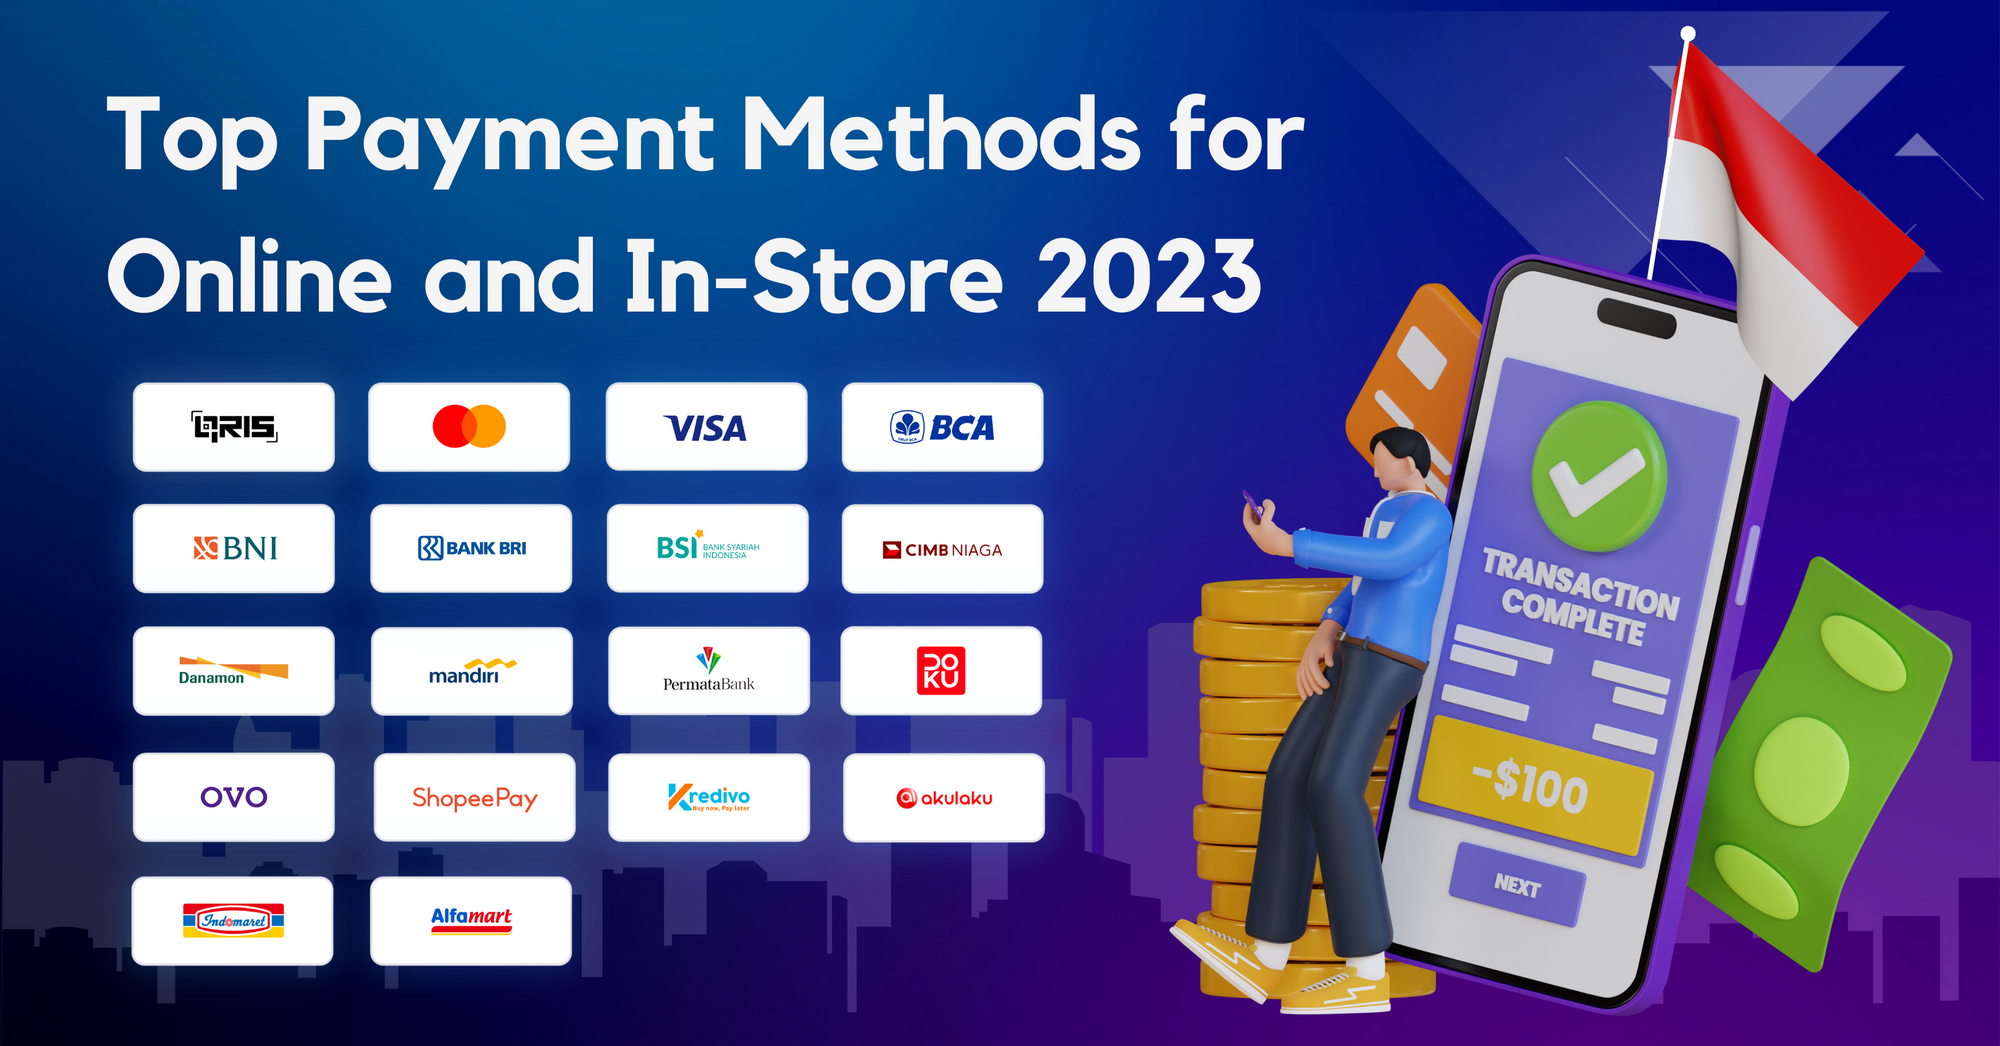 Merchant’s Guide to the Top Payment Methods in Indonesia: Online and In-Store (2023)